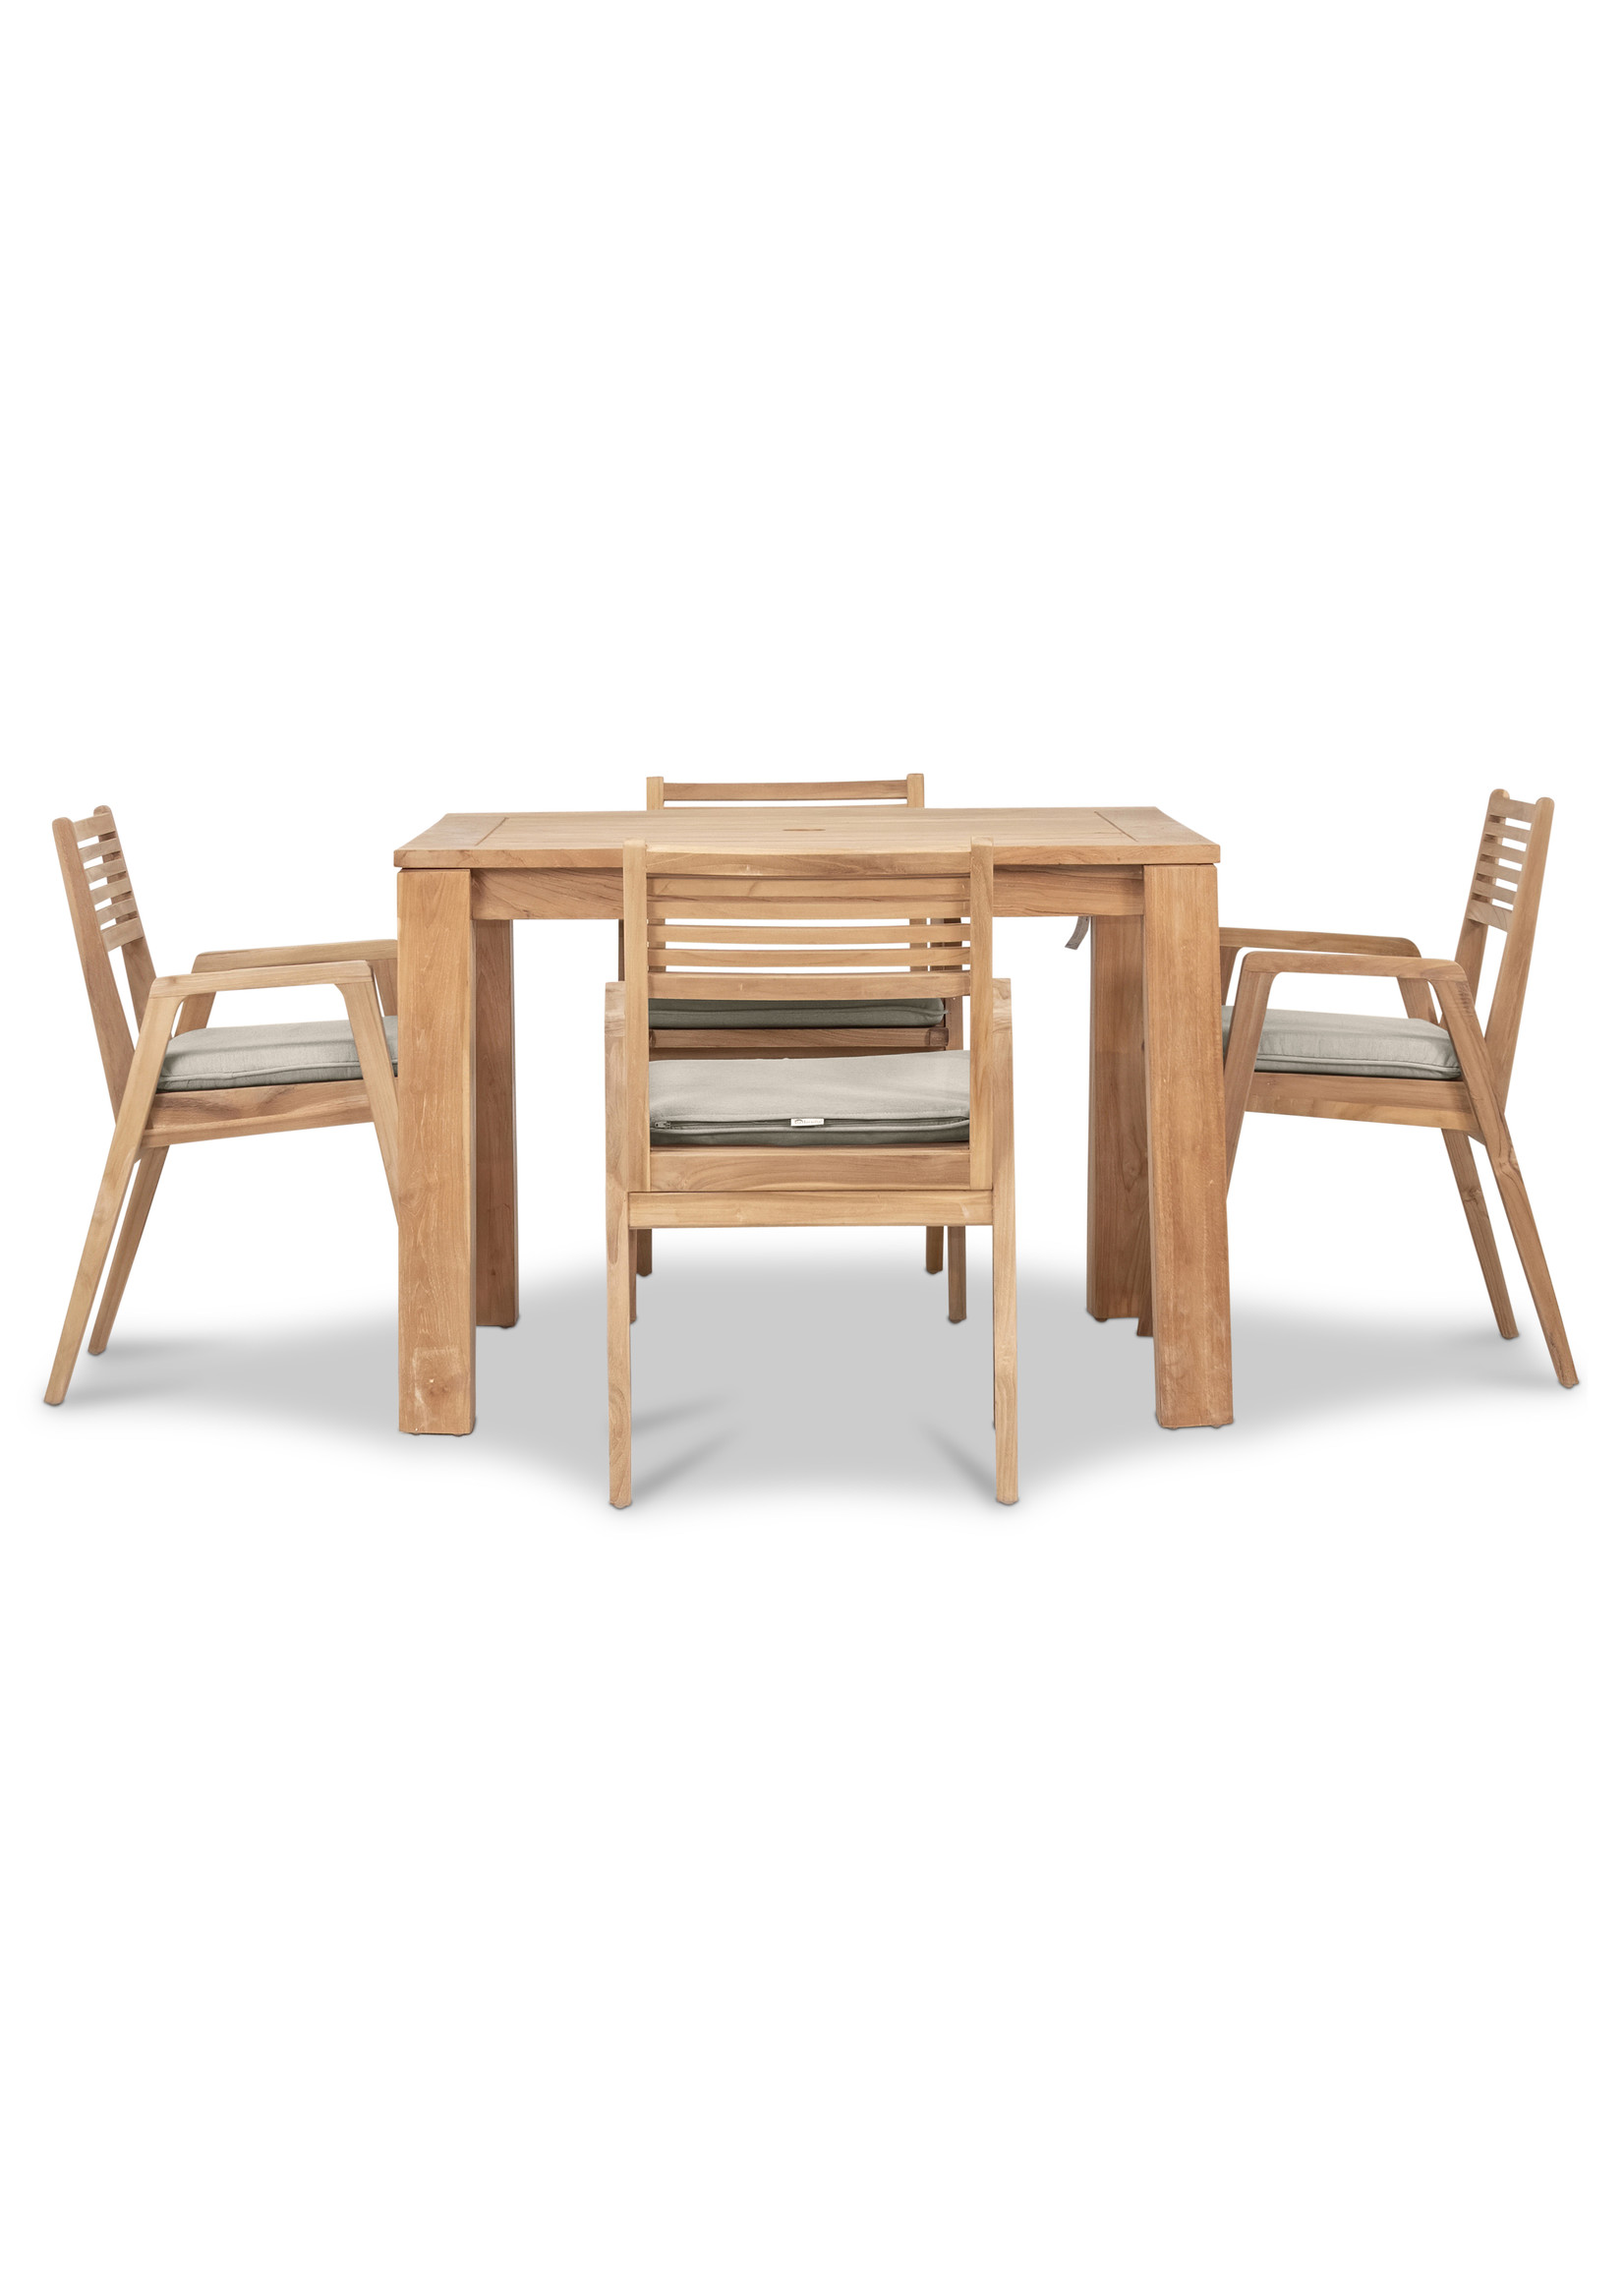 Harmonia Link 5 Piece Dining Set - (With Canvas Flax Cushions)